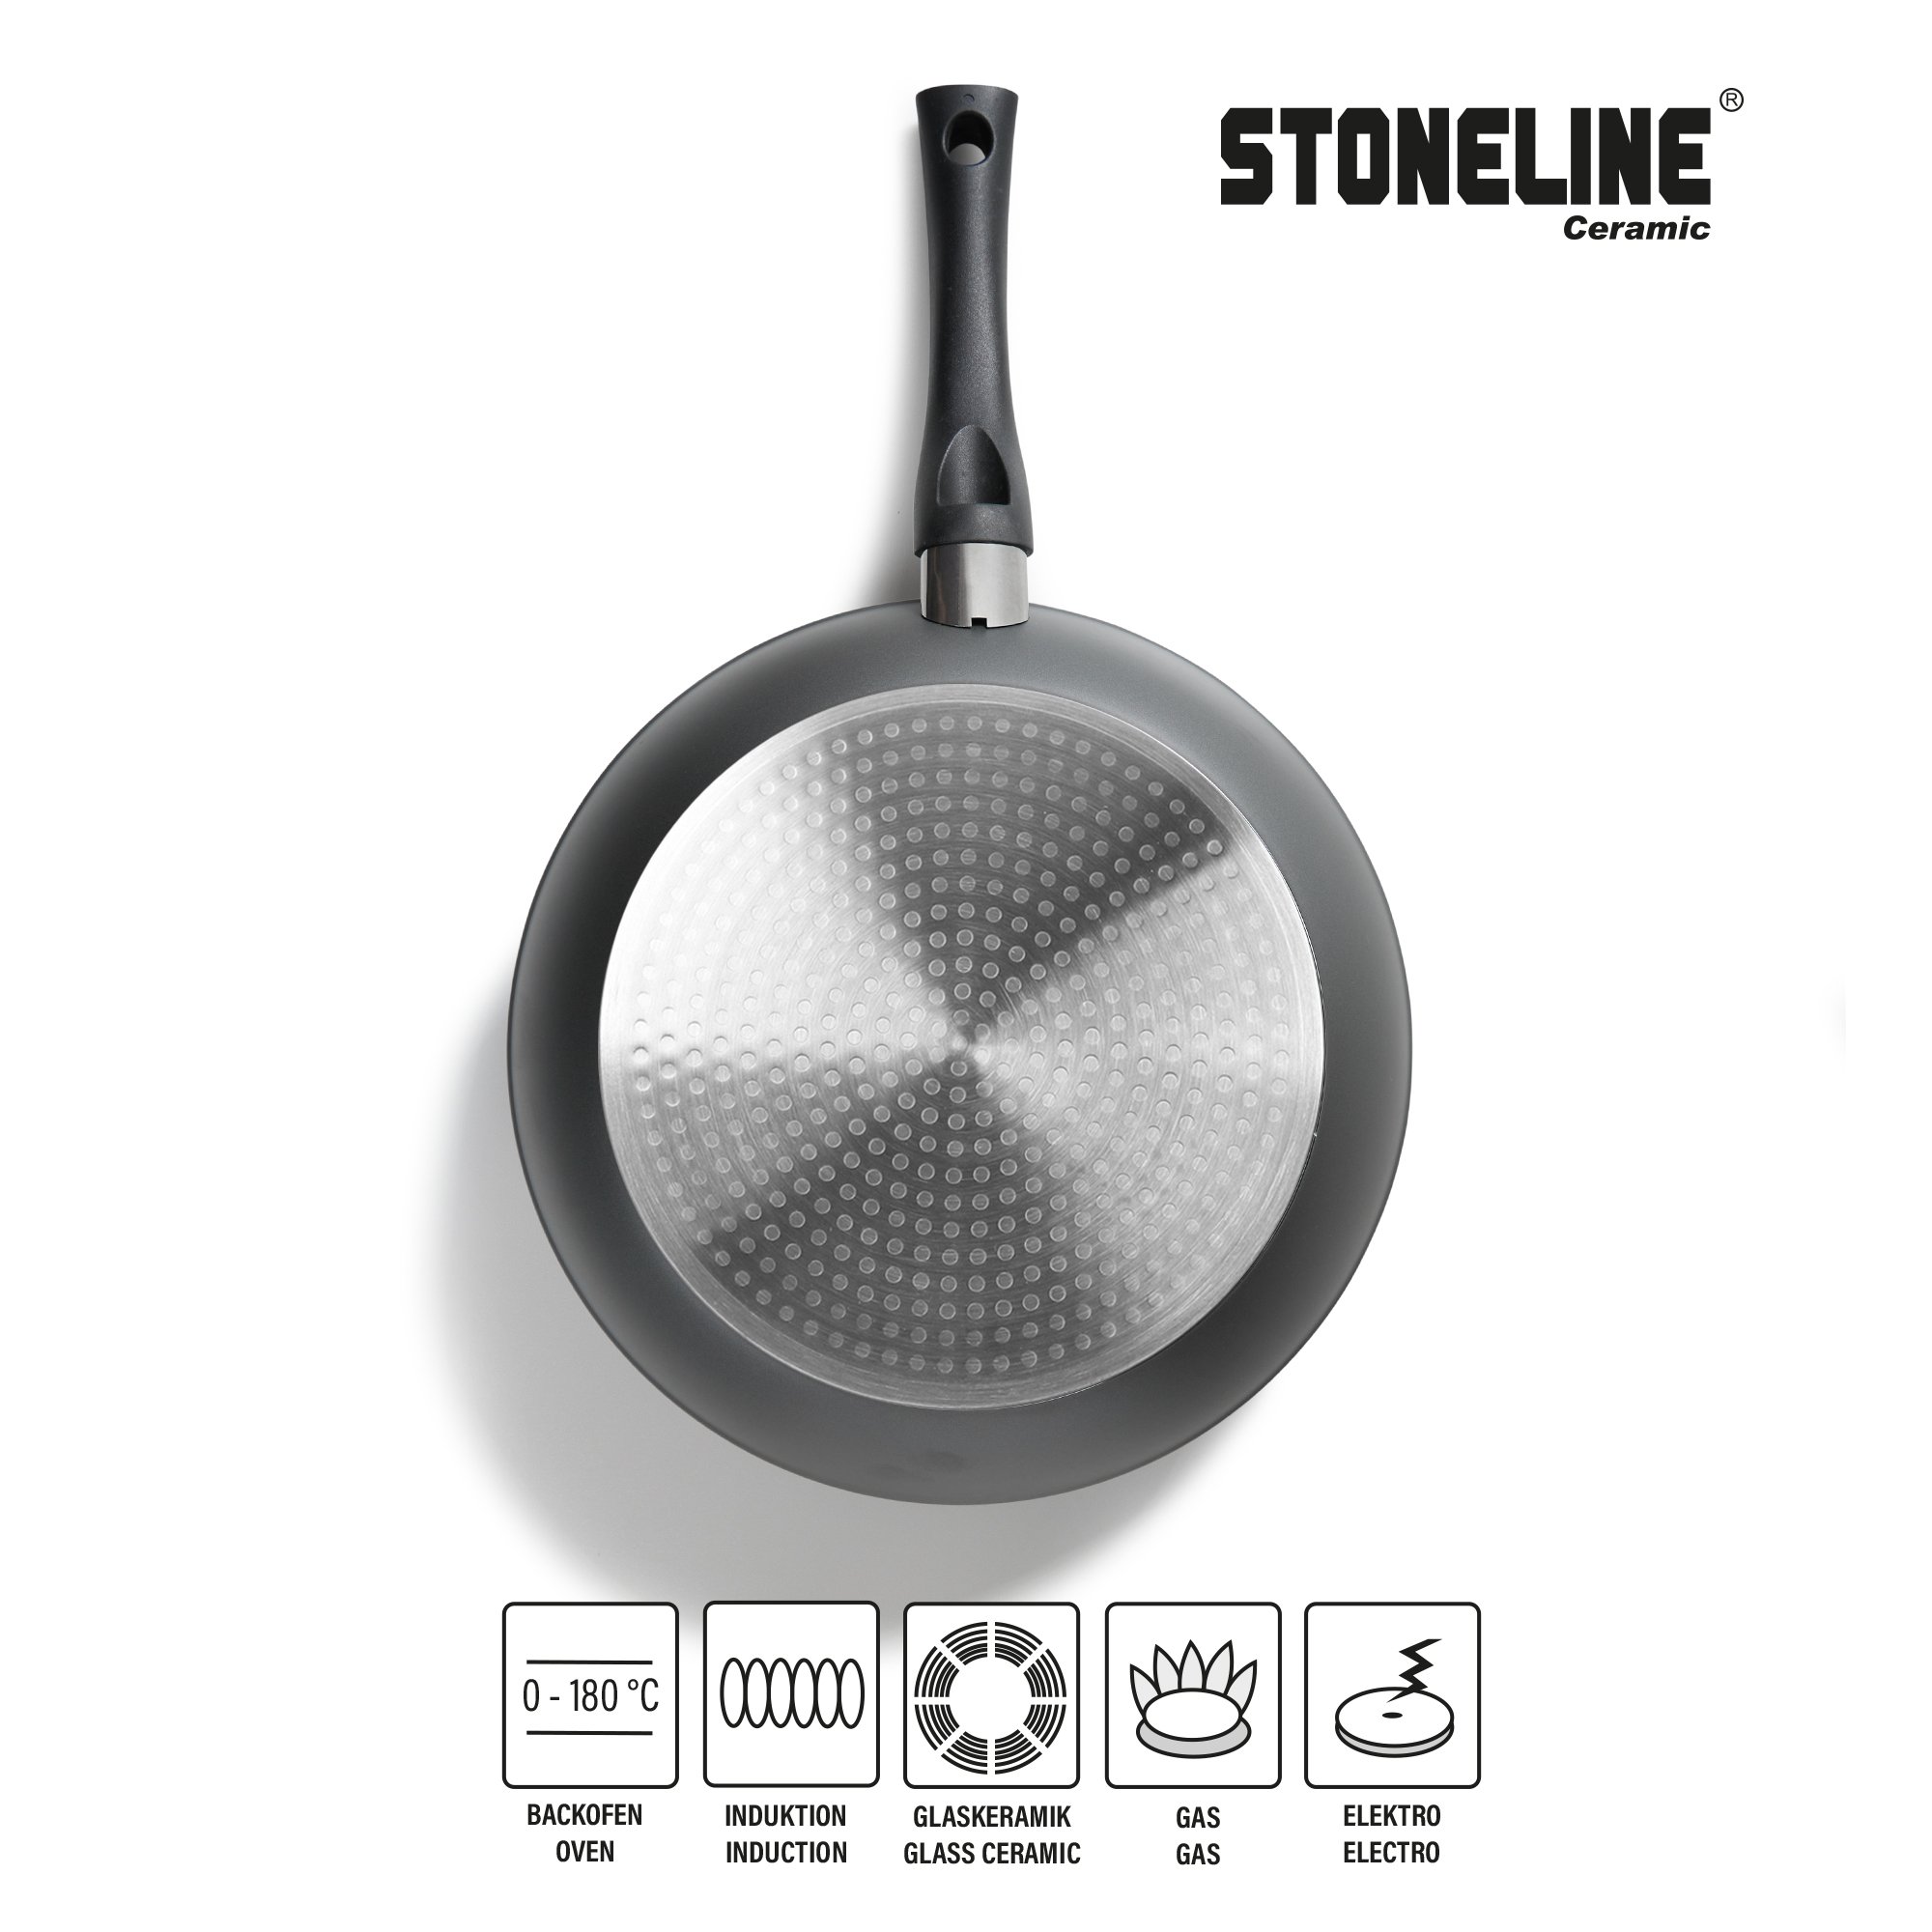 STONELINE® CERAMIC Frying Pan 28 cm, with Lid, Large Non-Stick Pan | CERAMIC Cookware